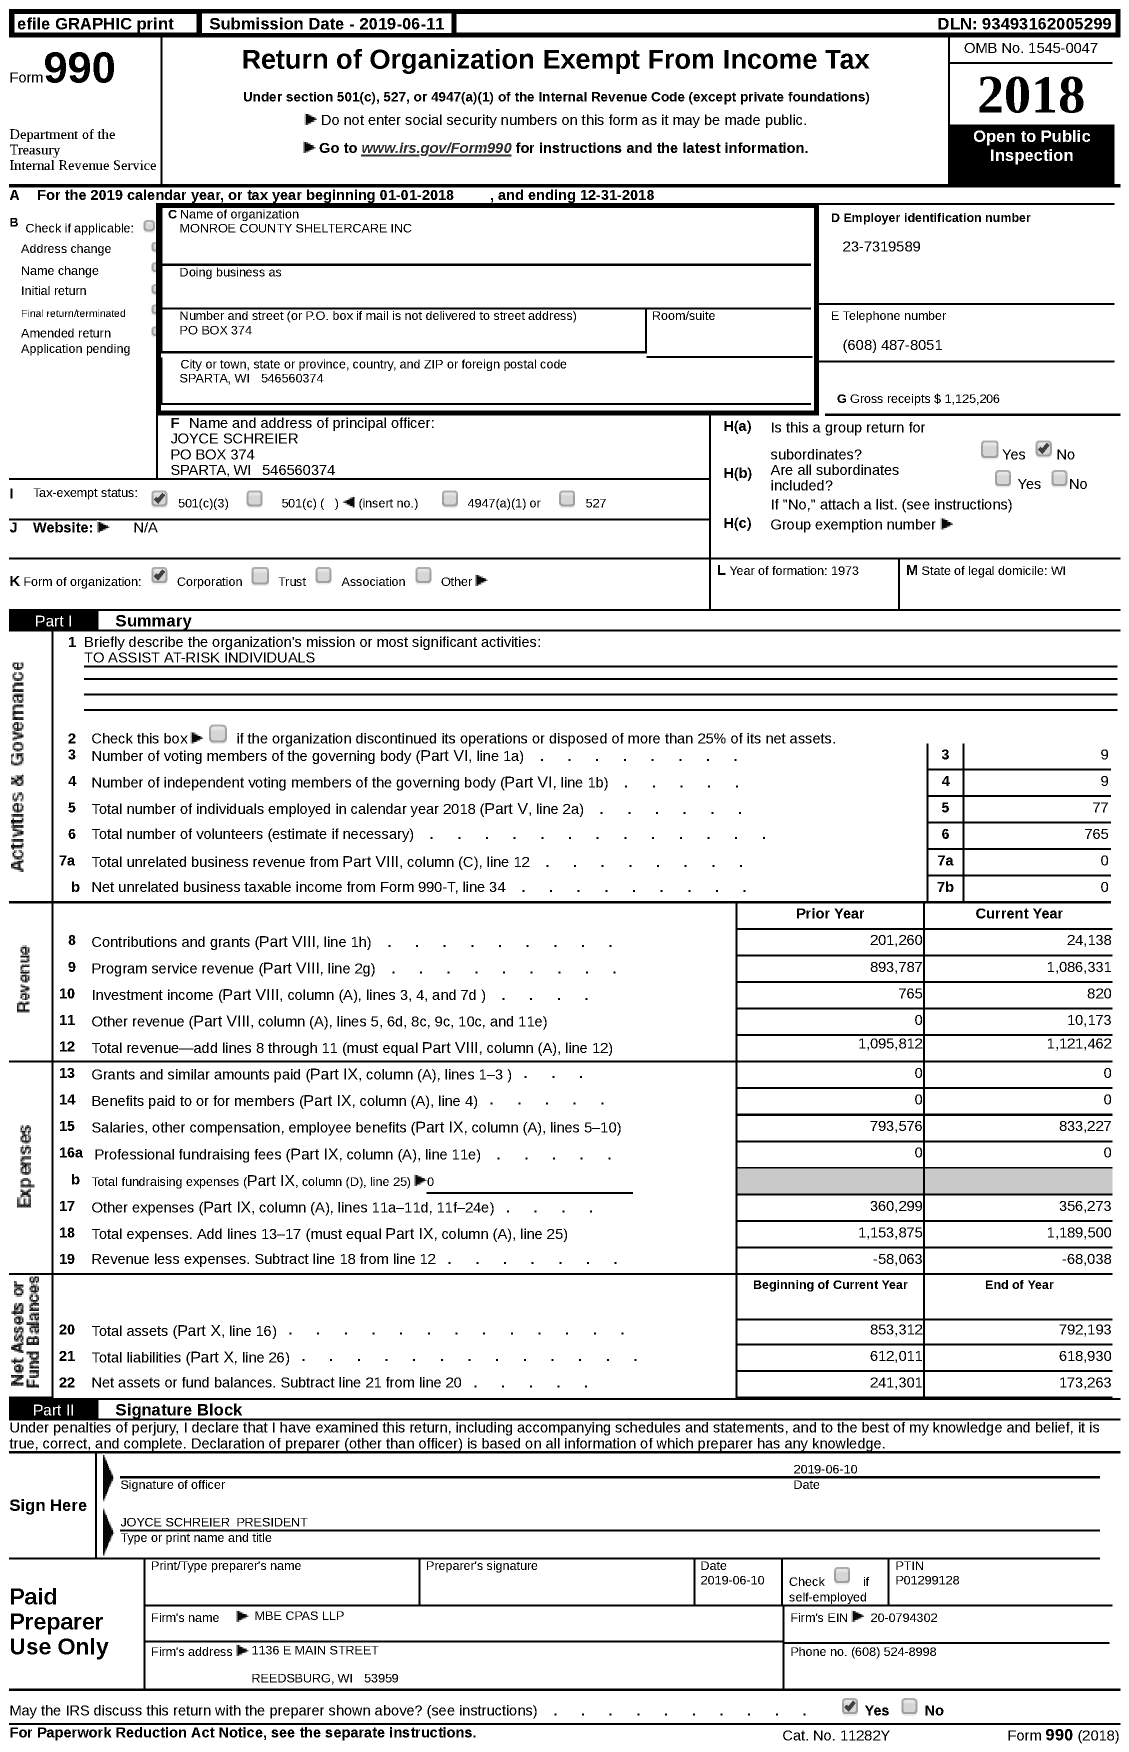 Image of first page of 2018 Form 990 for Monroe County Sheltercare